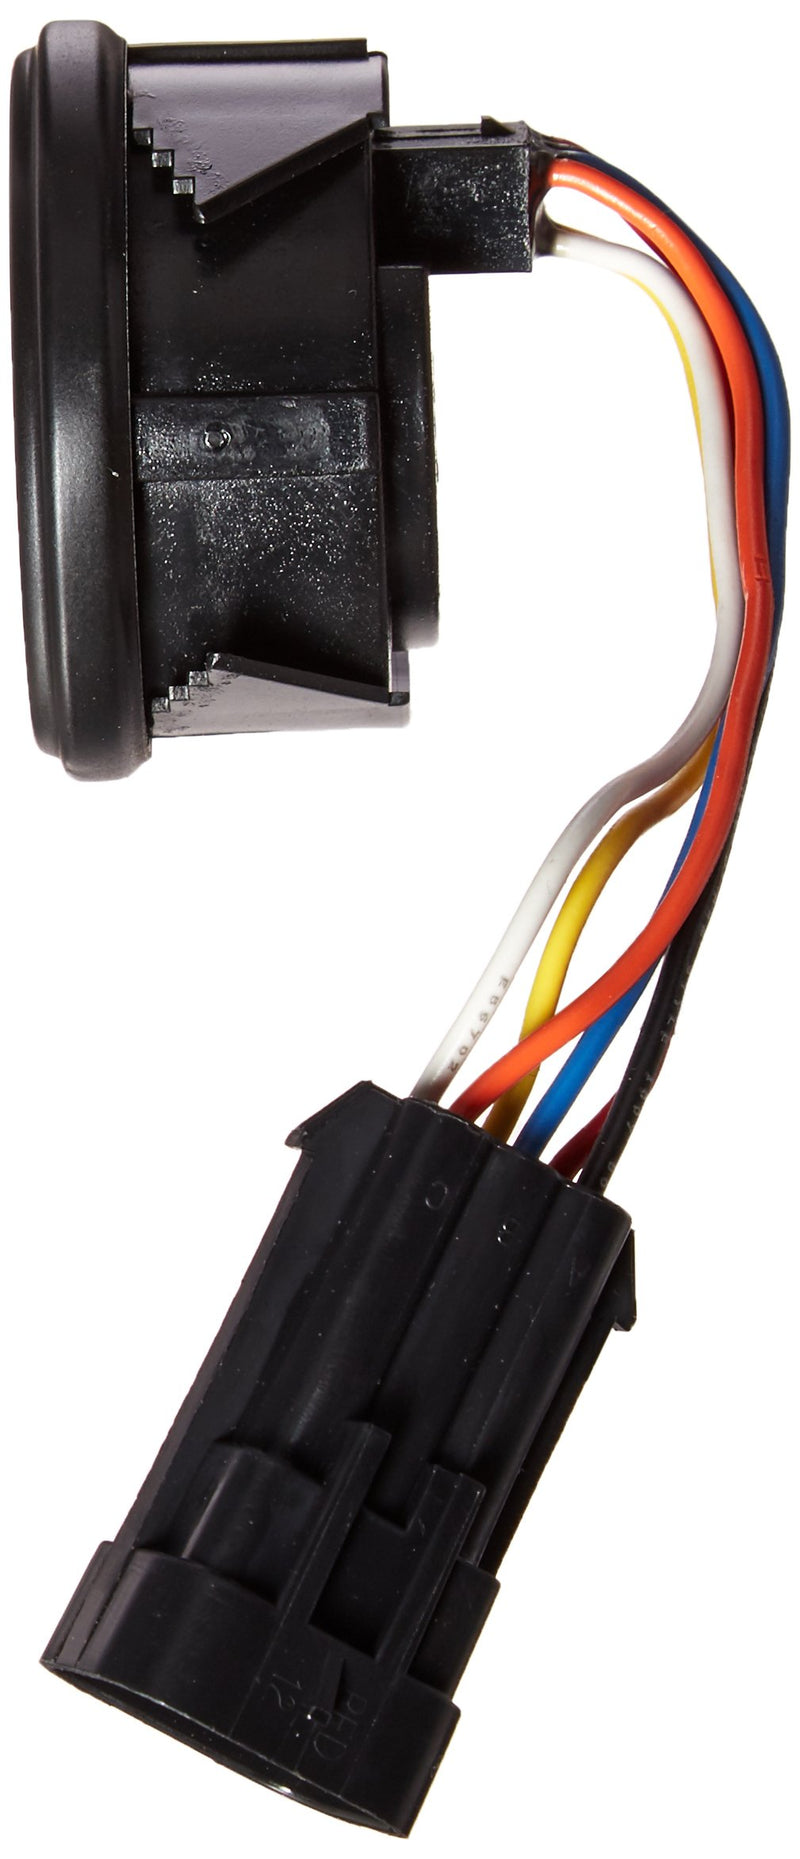 EZGO 610583 State of Charge and Fuel Meter Kit